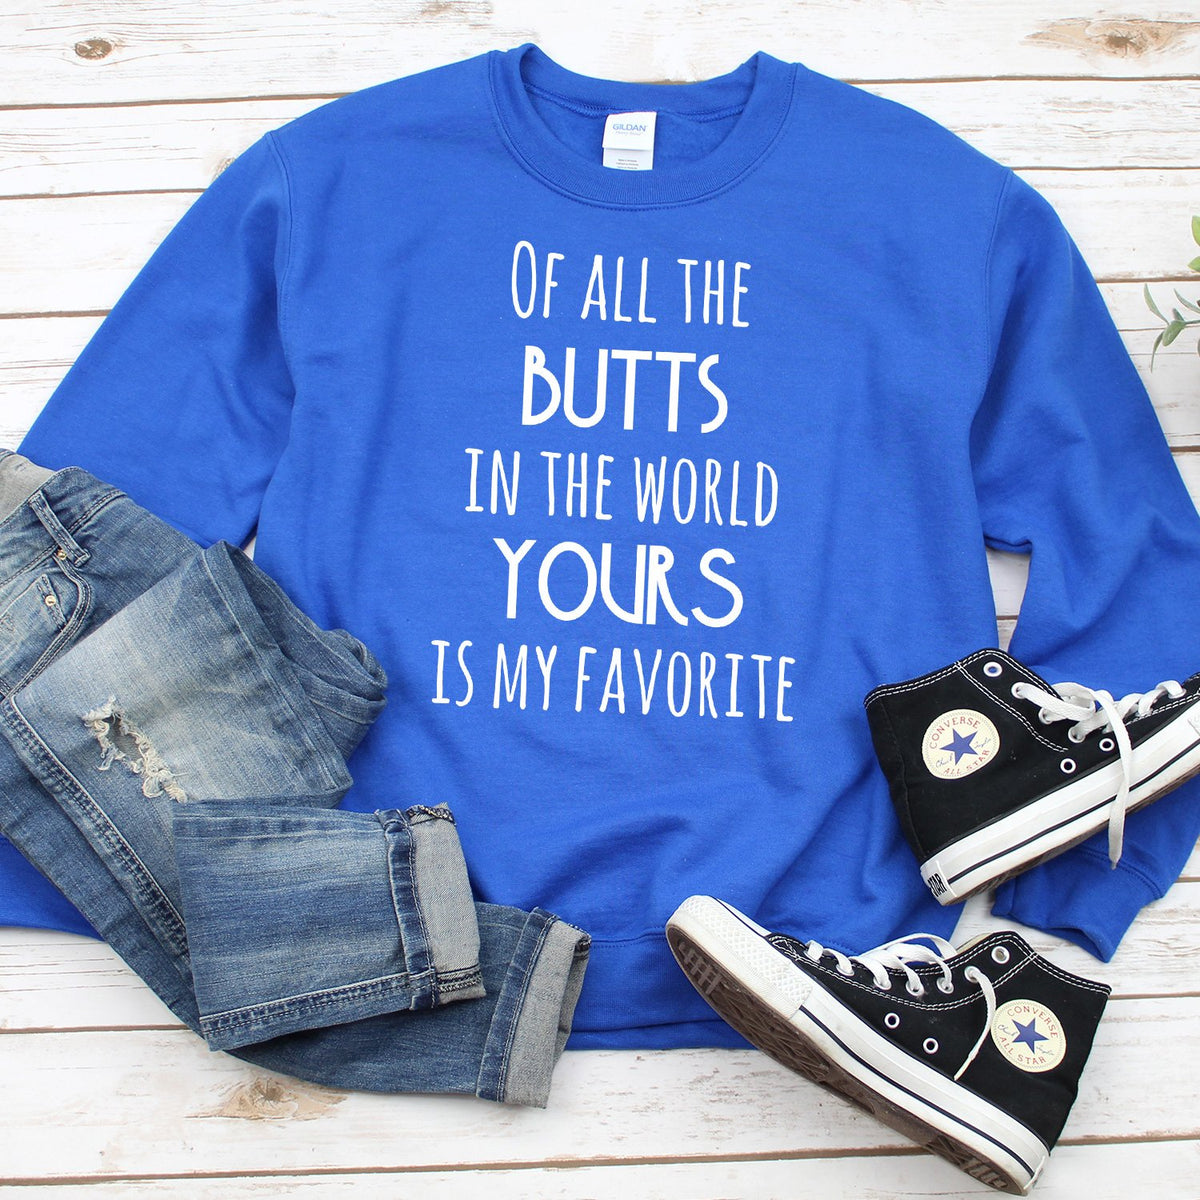 Off All the Butts in the World Yours is My Favorite - Long Sleeve Heavy Crewneck Sweatshirt